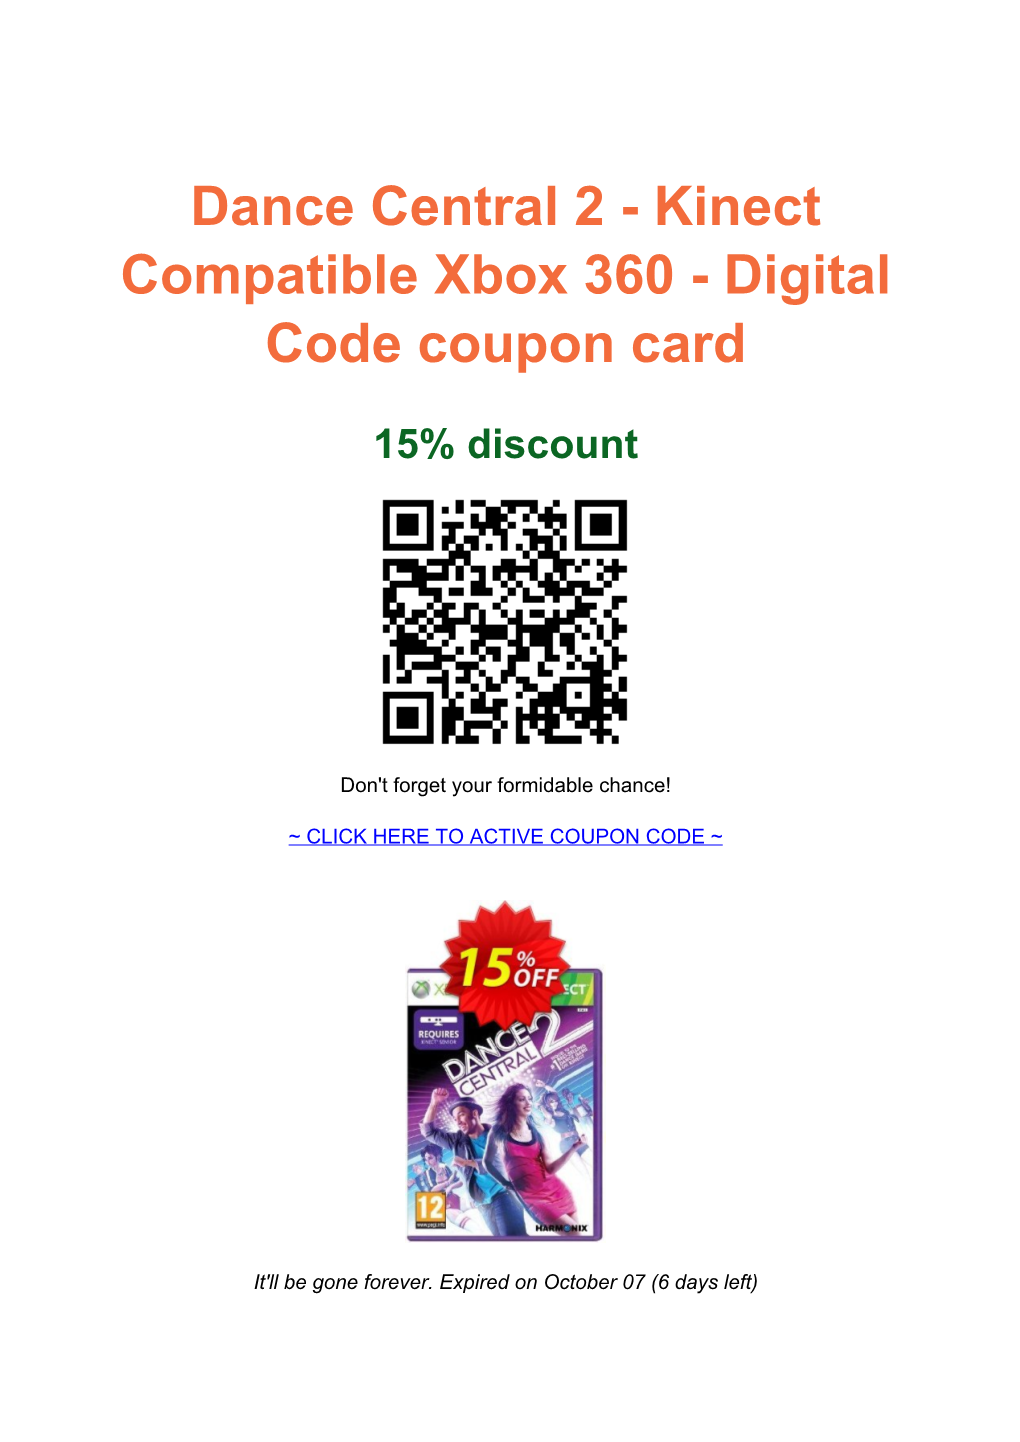 Dance Central 2 - Kinect Compatible Xbox 360 - Digital Code Coupon Card